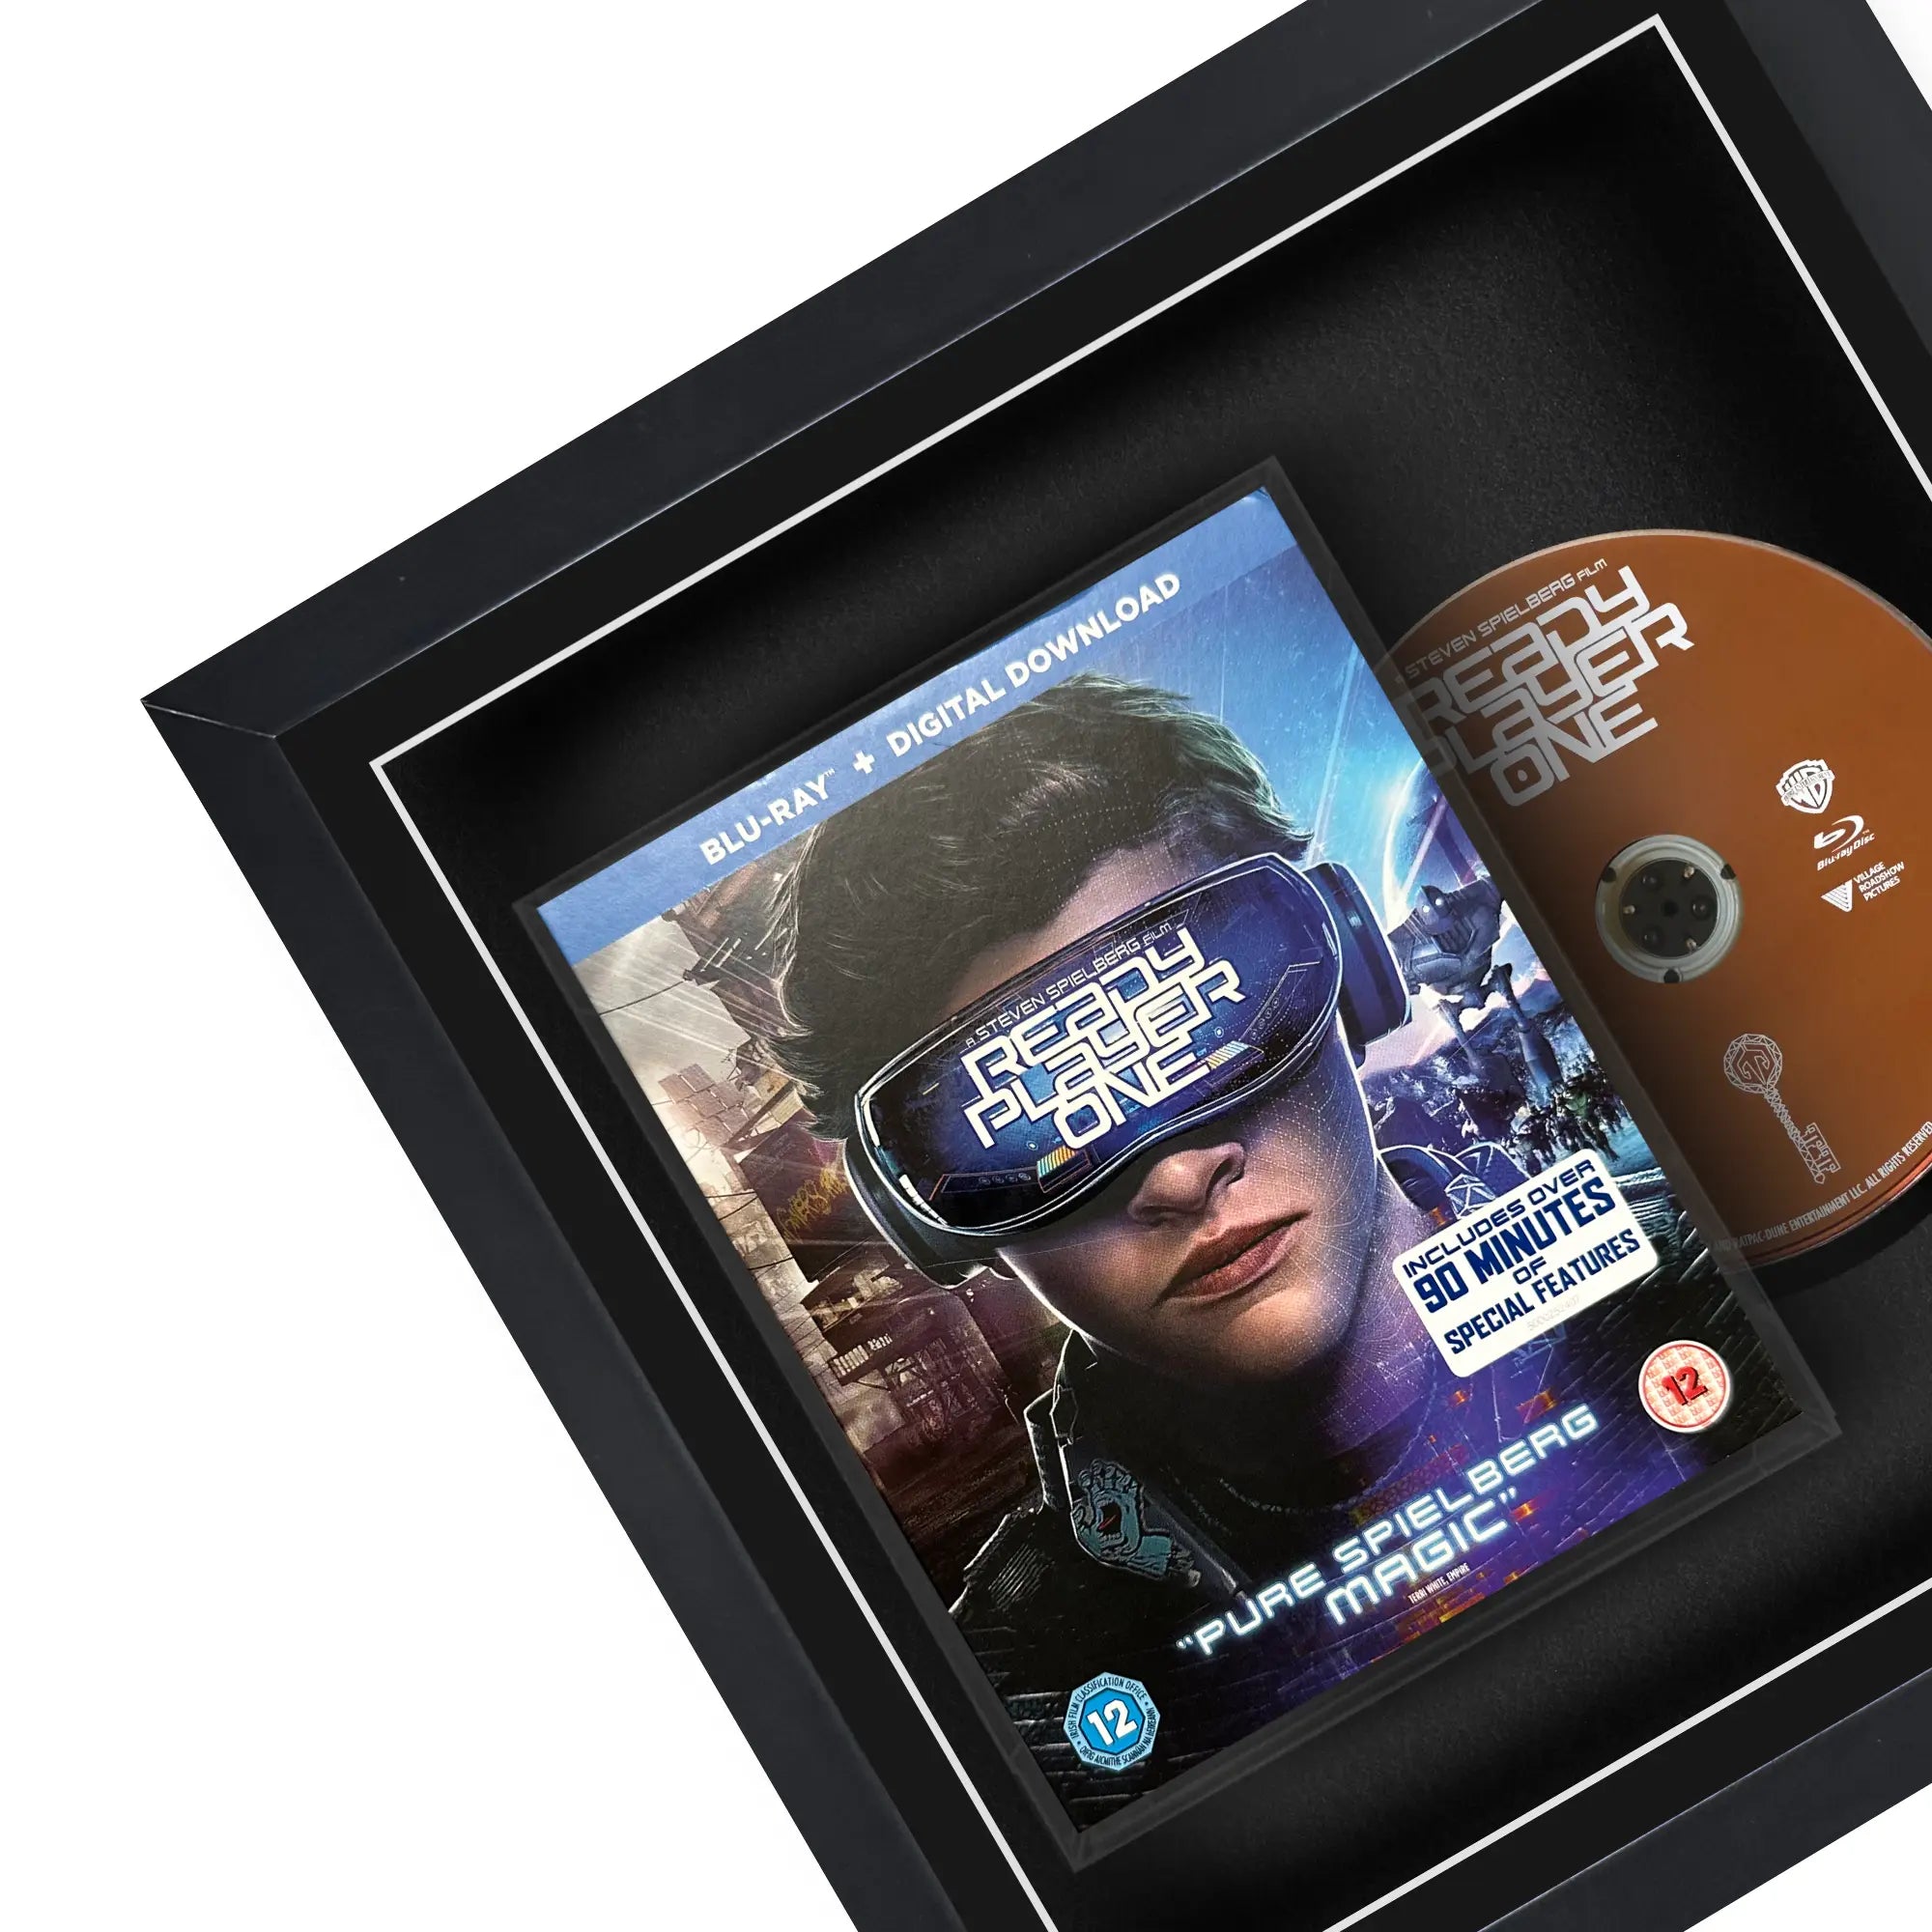 Frame your own Blu-ray DVD to be displayed within this square frame, the perfect way to showcase your movie